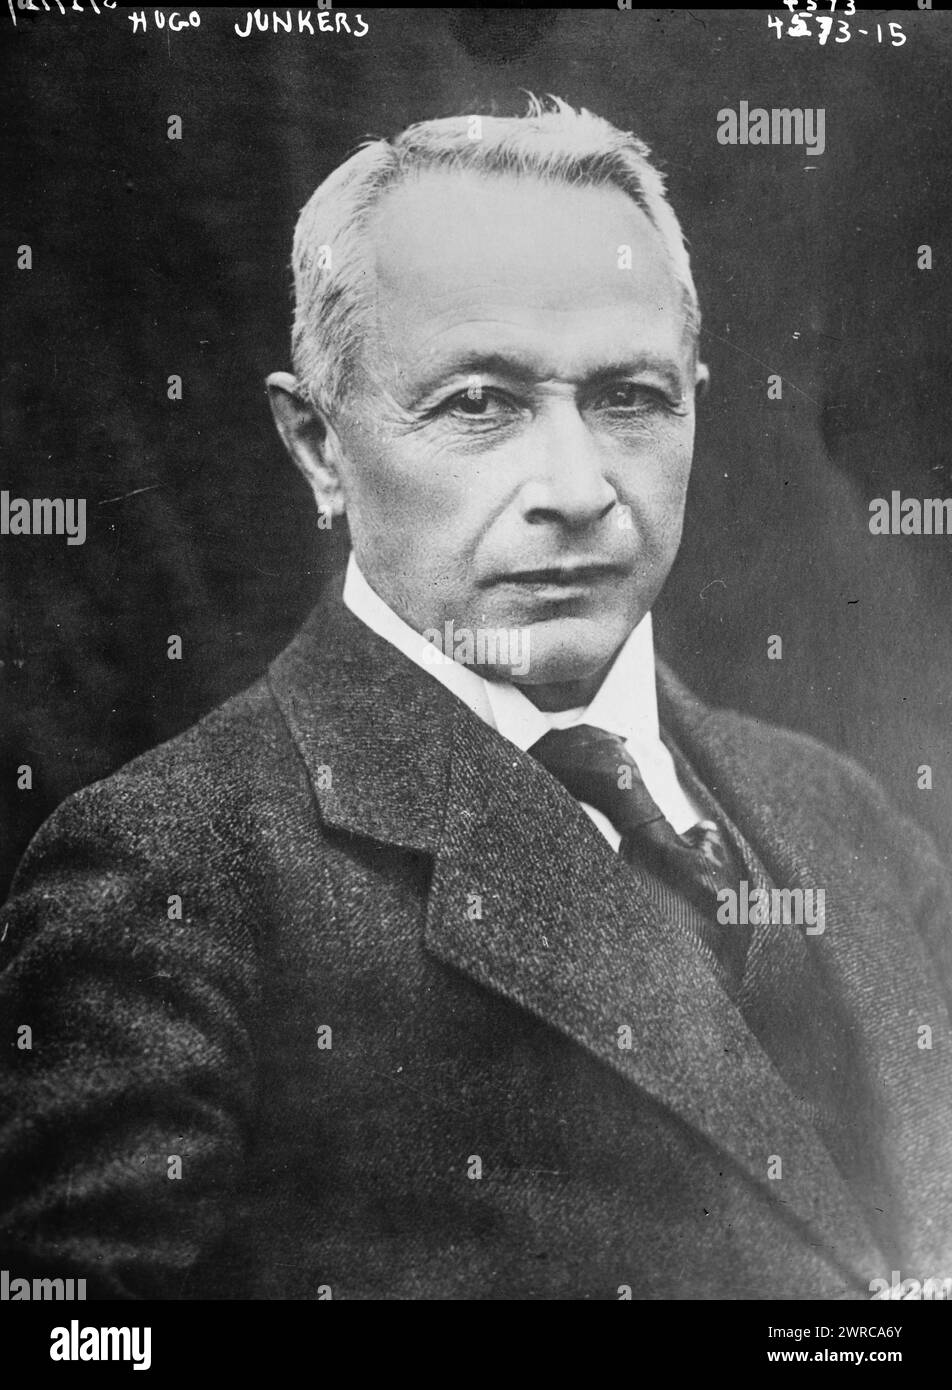 Hugo Junkers, Photograph shows German aircraft designer Hugo Junkers (1859-1935), designer of all-metal airplanes and founder of Junkers Flugzeug-und Motorenwerke AG., between ca. 1915 and ca. 1920, Glass negatives, 1 negative: glass Stock Photo